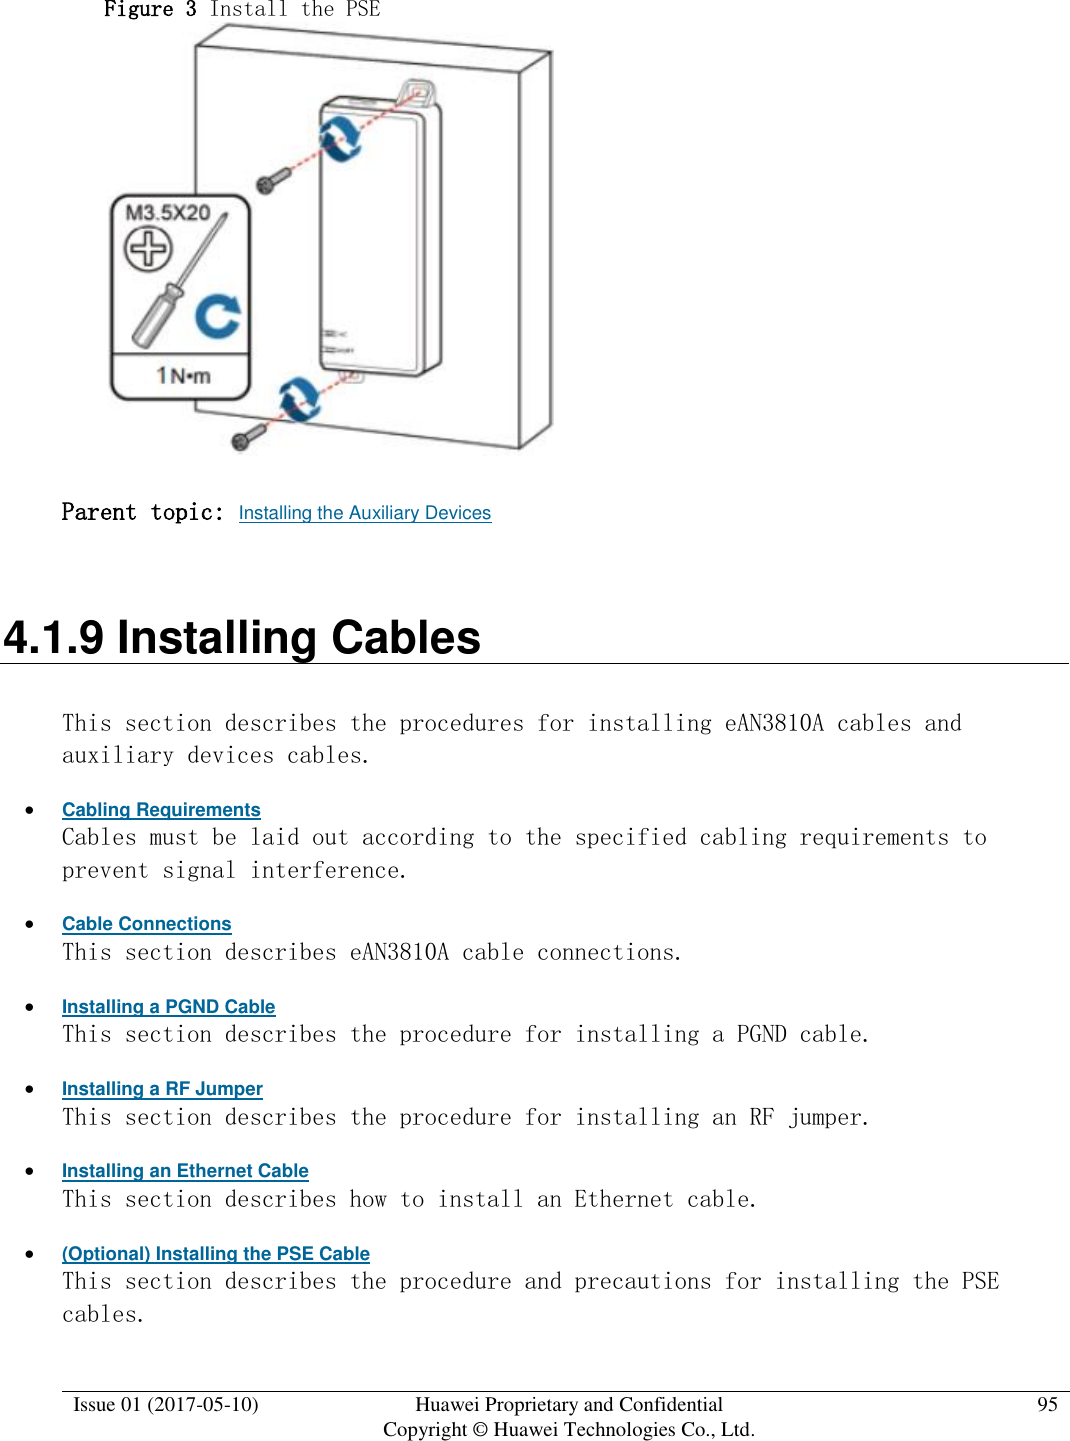  Issue 01 (2017-05-10) Huawei Proprietary and Confidential      Copyright © Huawei Technologies Co., Ltd. 95  Figure 3 Install the PSE   Parent topic: Installing the Auxiliary Devices 4.1.9 Installing Cables This section describes the procedures for installing eAN3810A cables and auxiliary devices cables.  Cabling Requirements Cables must be laid out according to the specified cabling requirements to prevent signal interference.  Cable Connections This section describes eAN3810A cable connections.  Installing a PGND Cable This section describes the procedure for installing a PGND cable.  Installing a RF Jumper This section describes the procedure for installing an RF jumper.  Installing an Ethernet Cable This section describes how to install an Ethernet cable.  (Optional) Installing the PSE Cable This section describes the procedure and precautions for installing the PSE cables. 